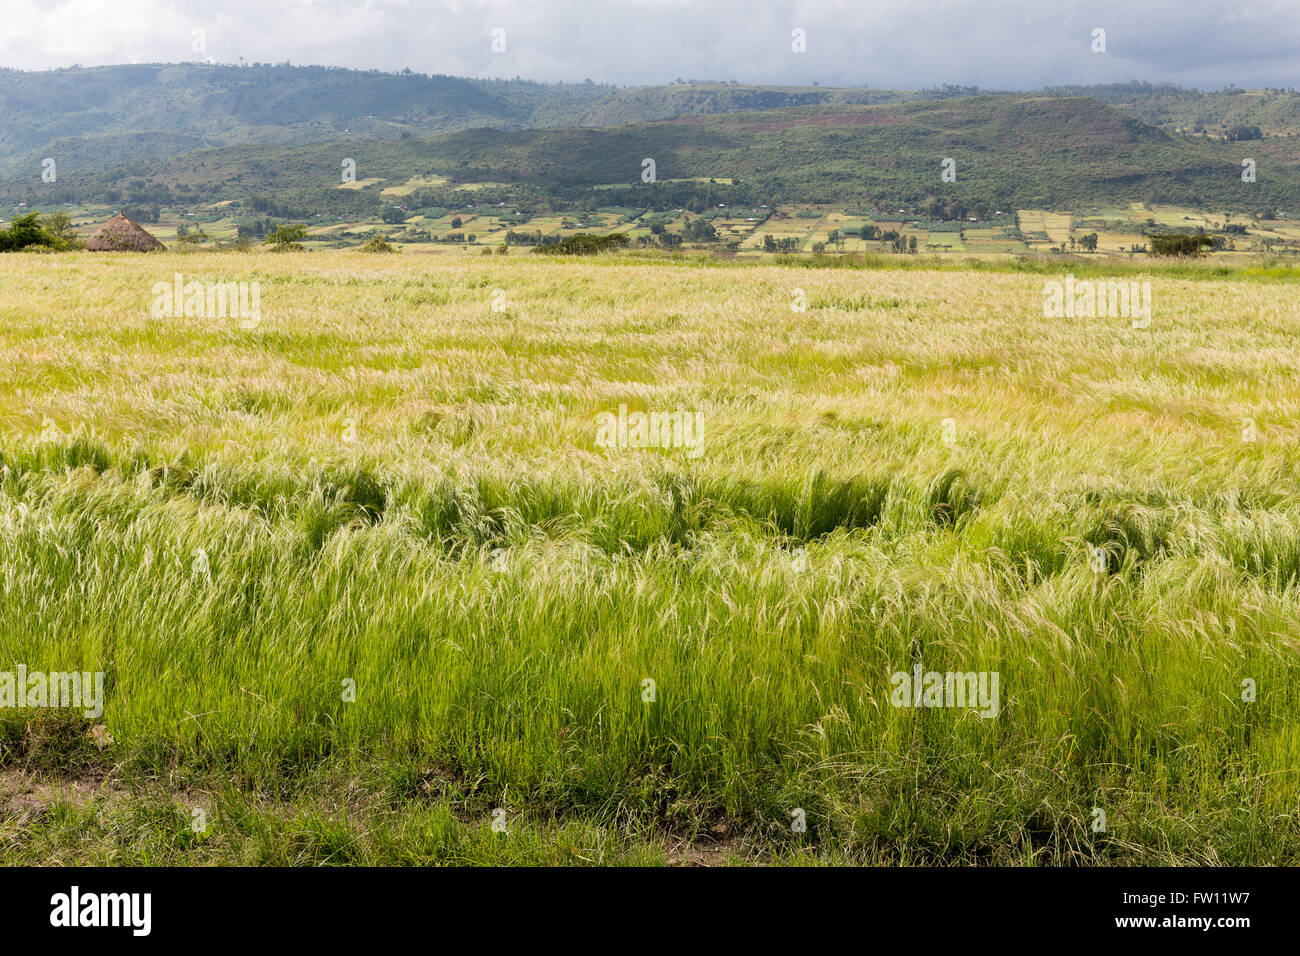 West Shewa, Oromia, Ethiopia, October 2013 Ripening field of teff, the country's staple food from which injera bread is made. Stock Photo